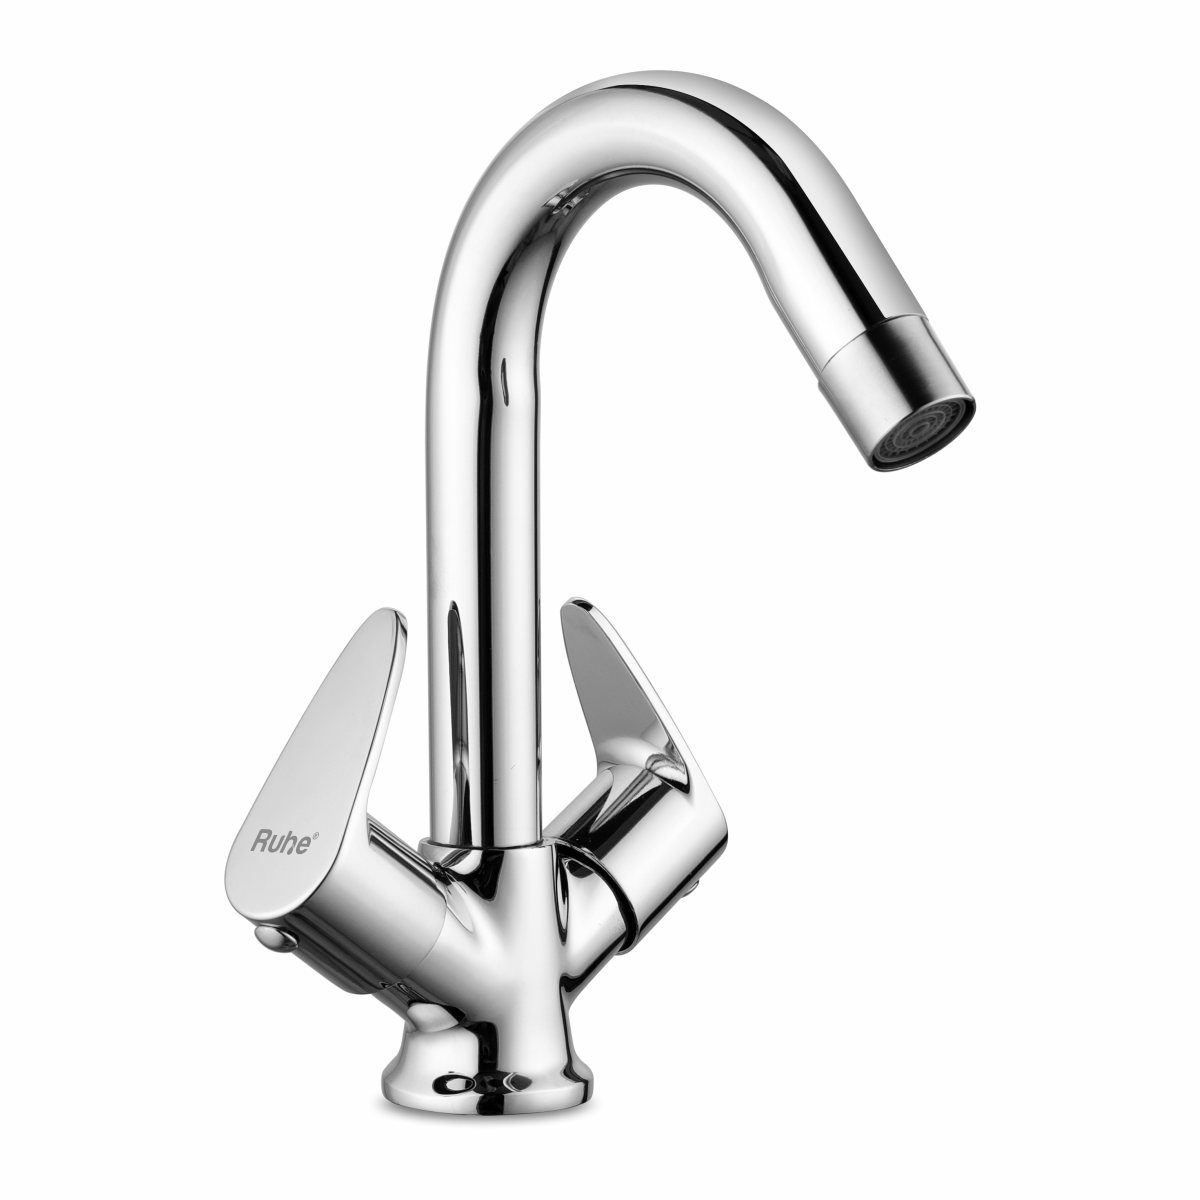 Liva Centre Hole Basin Mixer with Small (12 inches) Round Swivel Spout Faucet - by Ruhe®